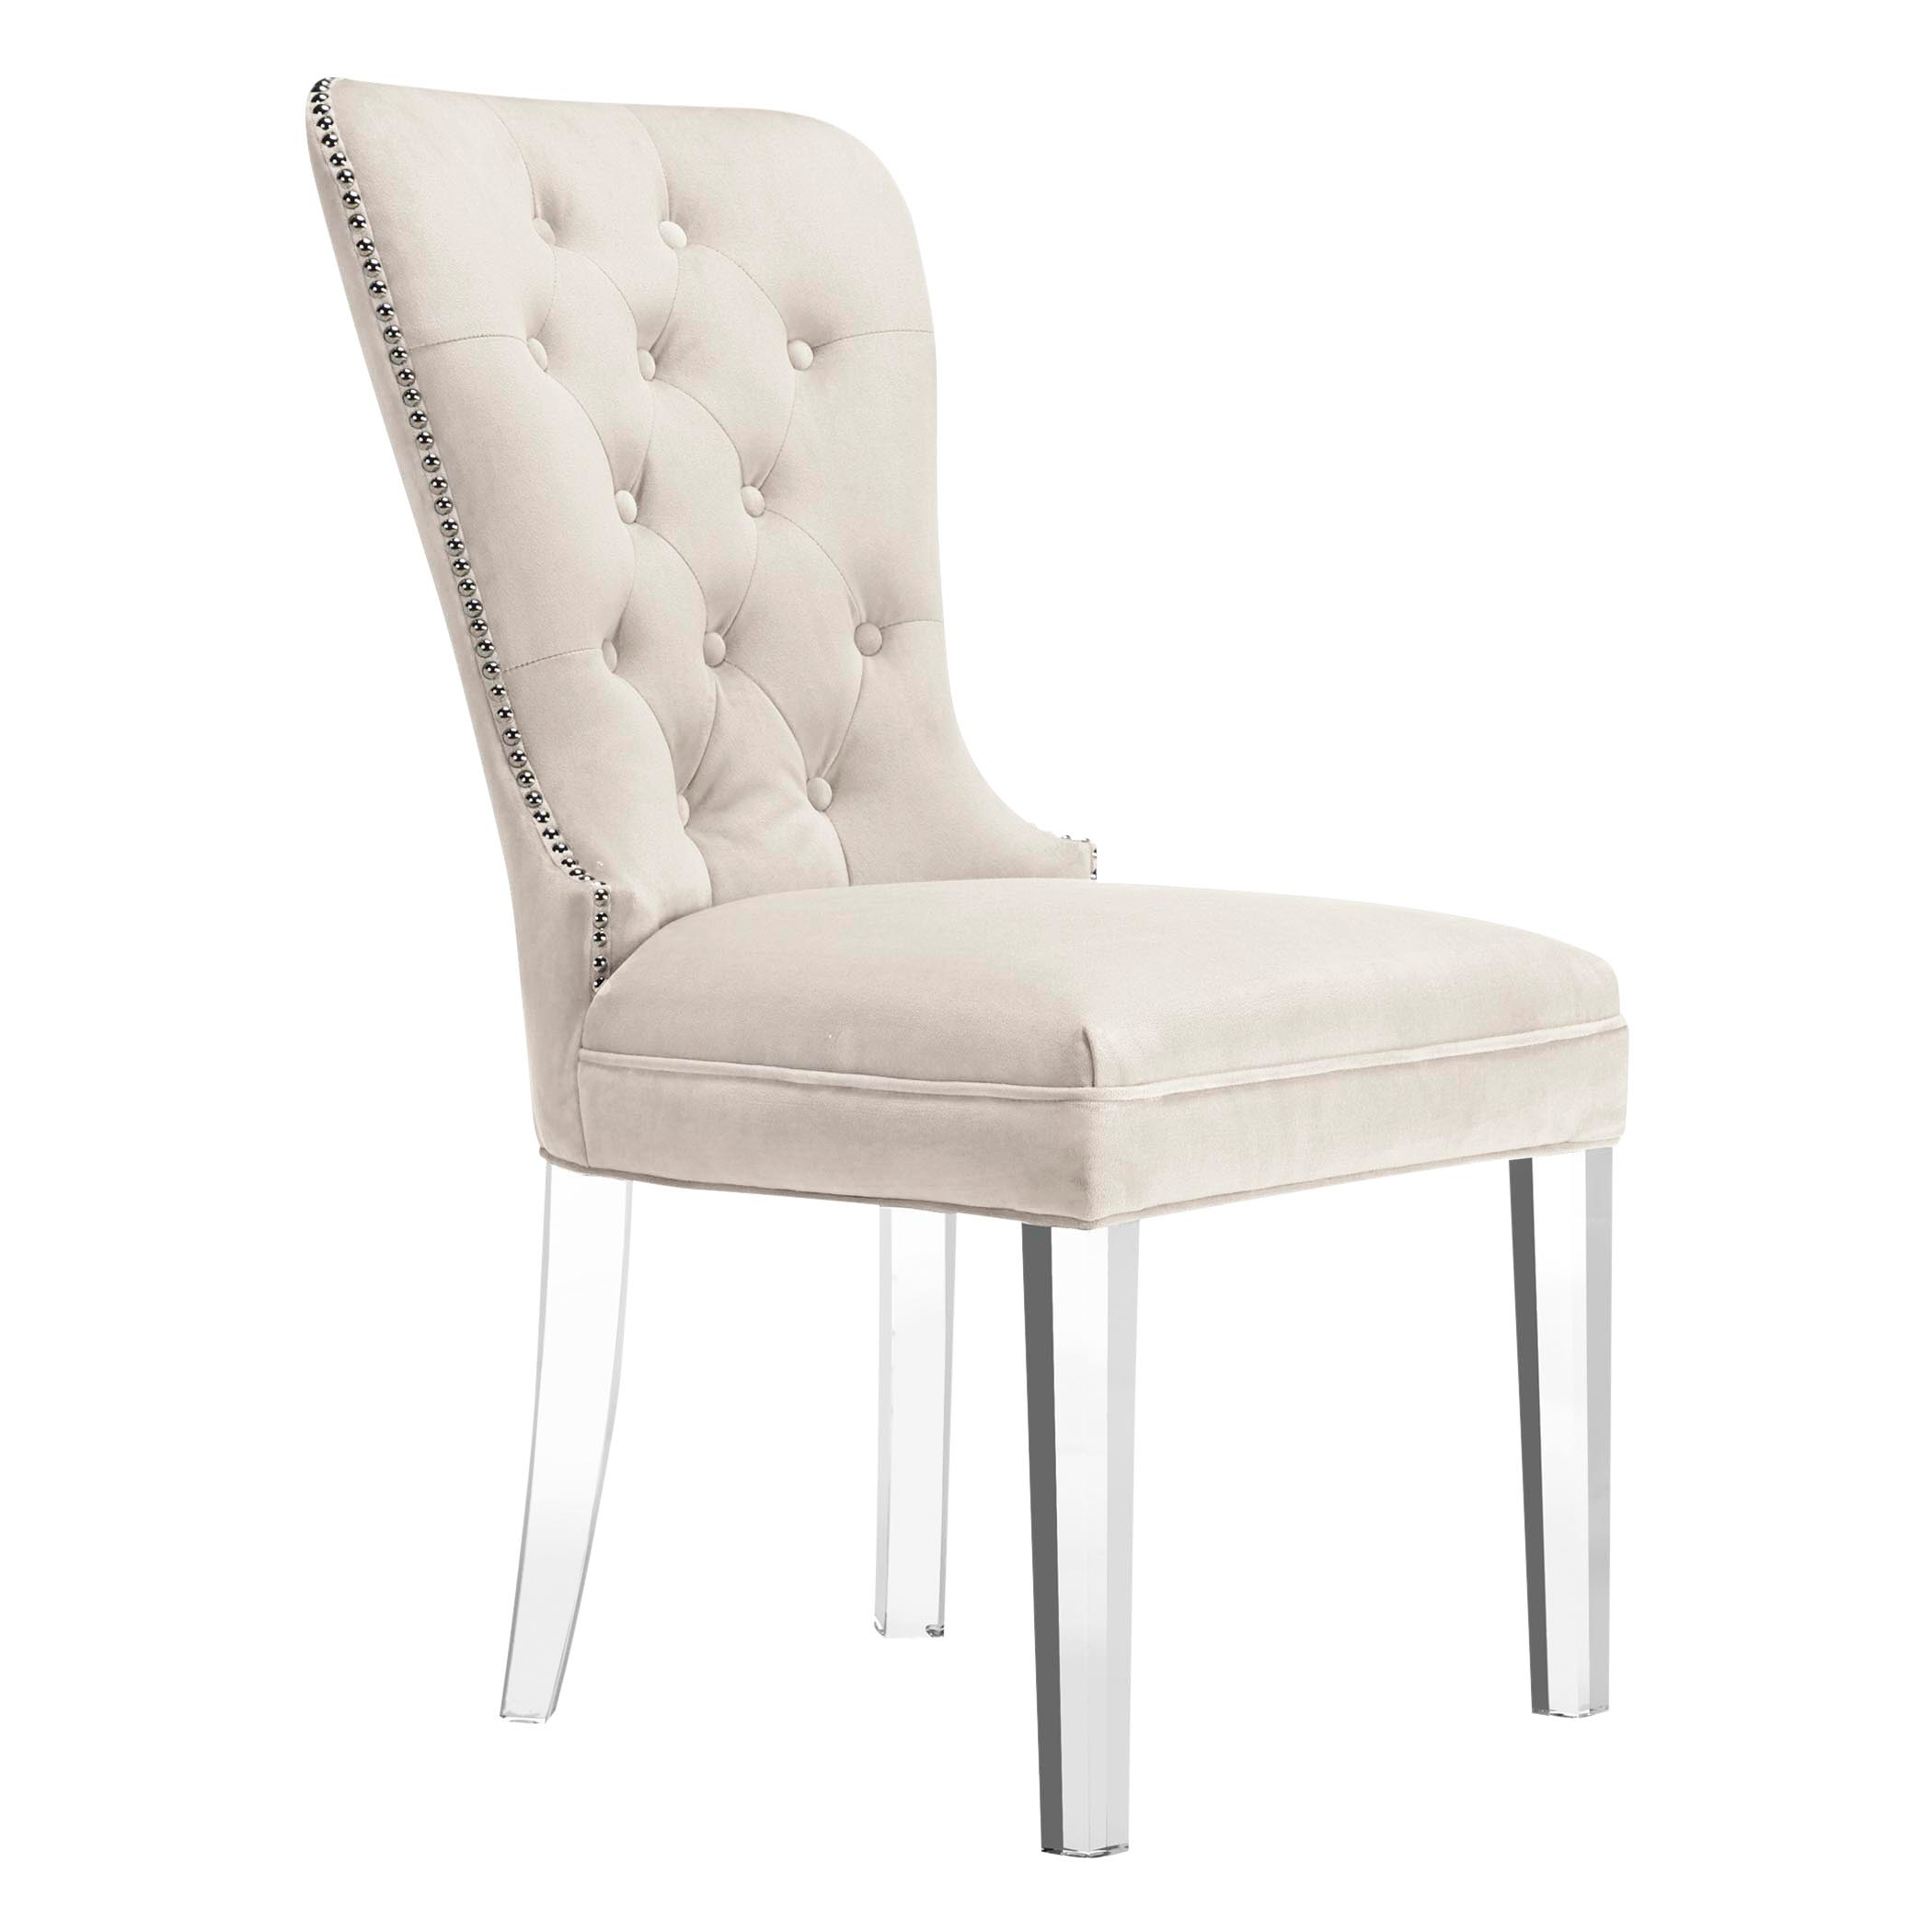 Charlotte Dining Chair - Acrylic | Zgallerie